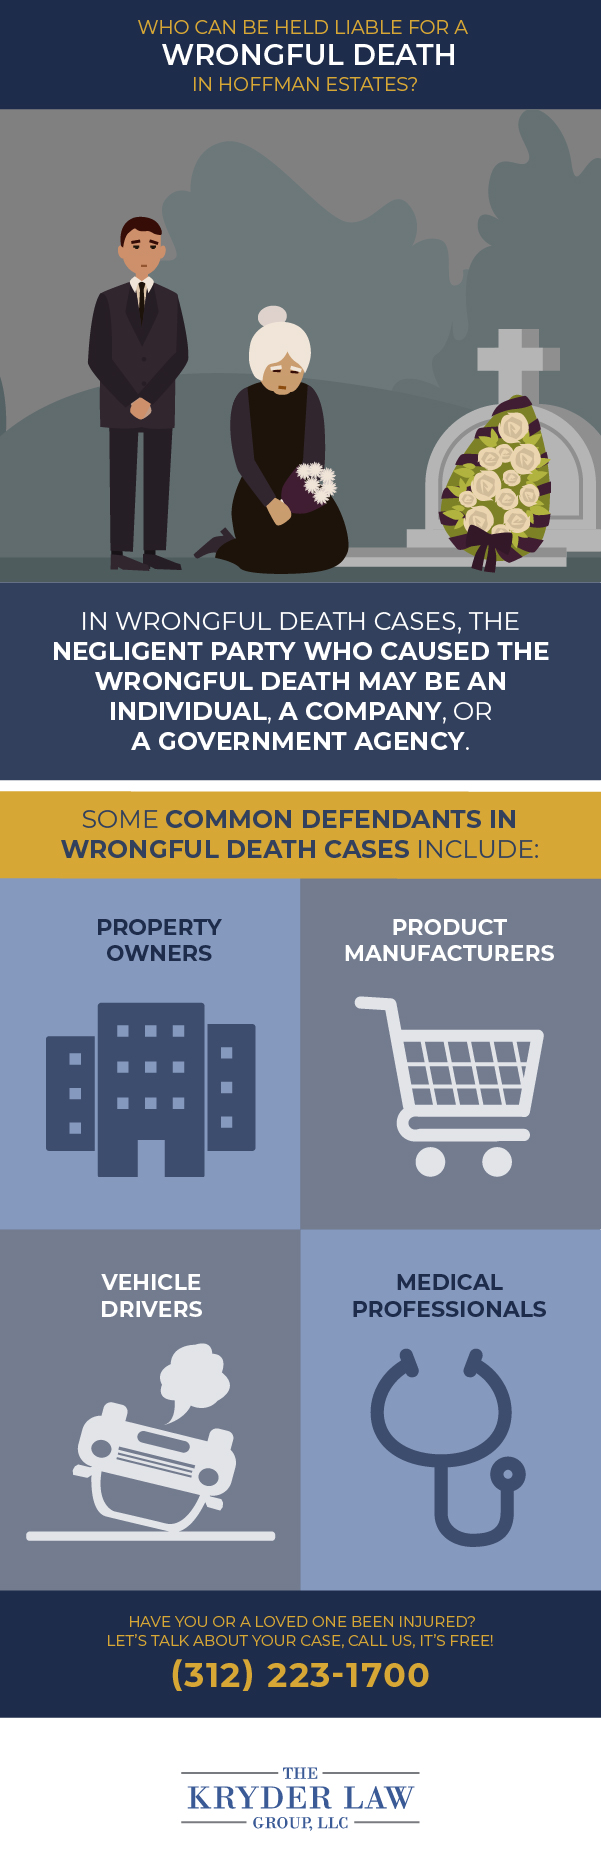 Who Can Be Held Liable for a Wrongful Death in Hoffman Estates Infographic